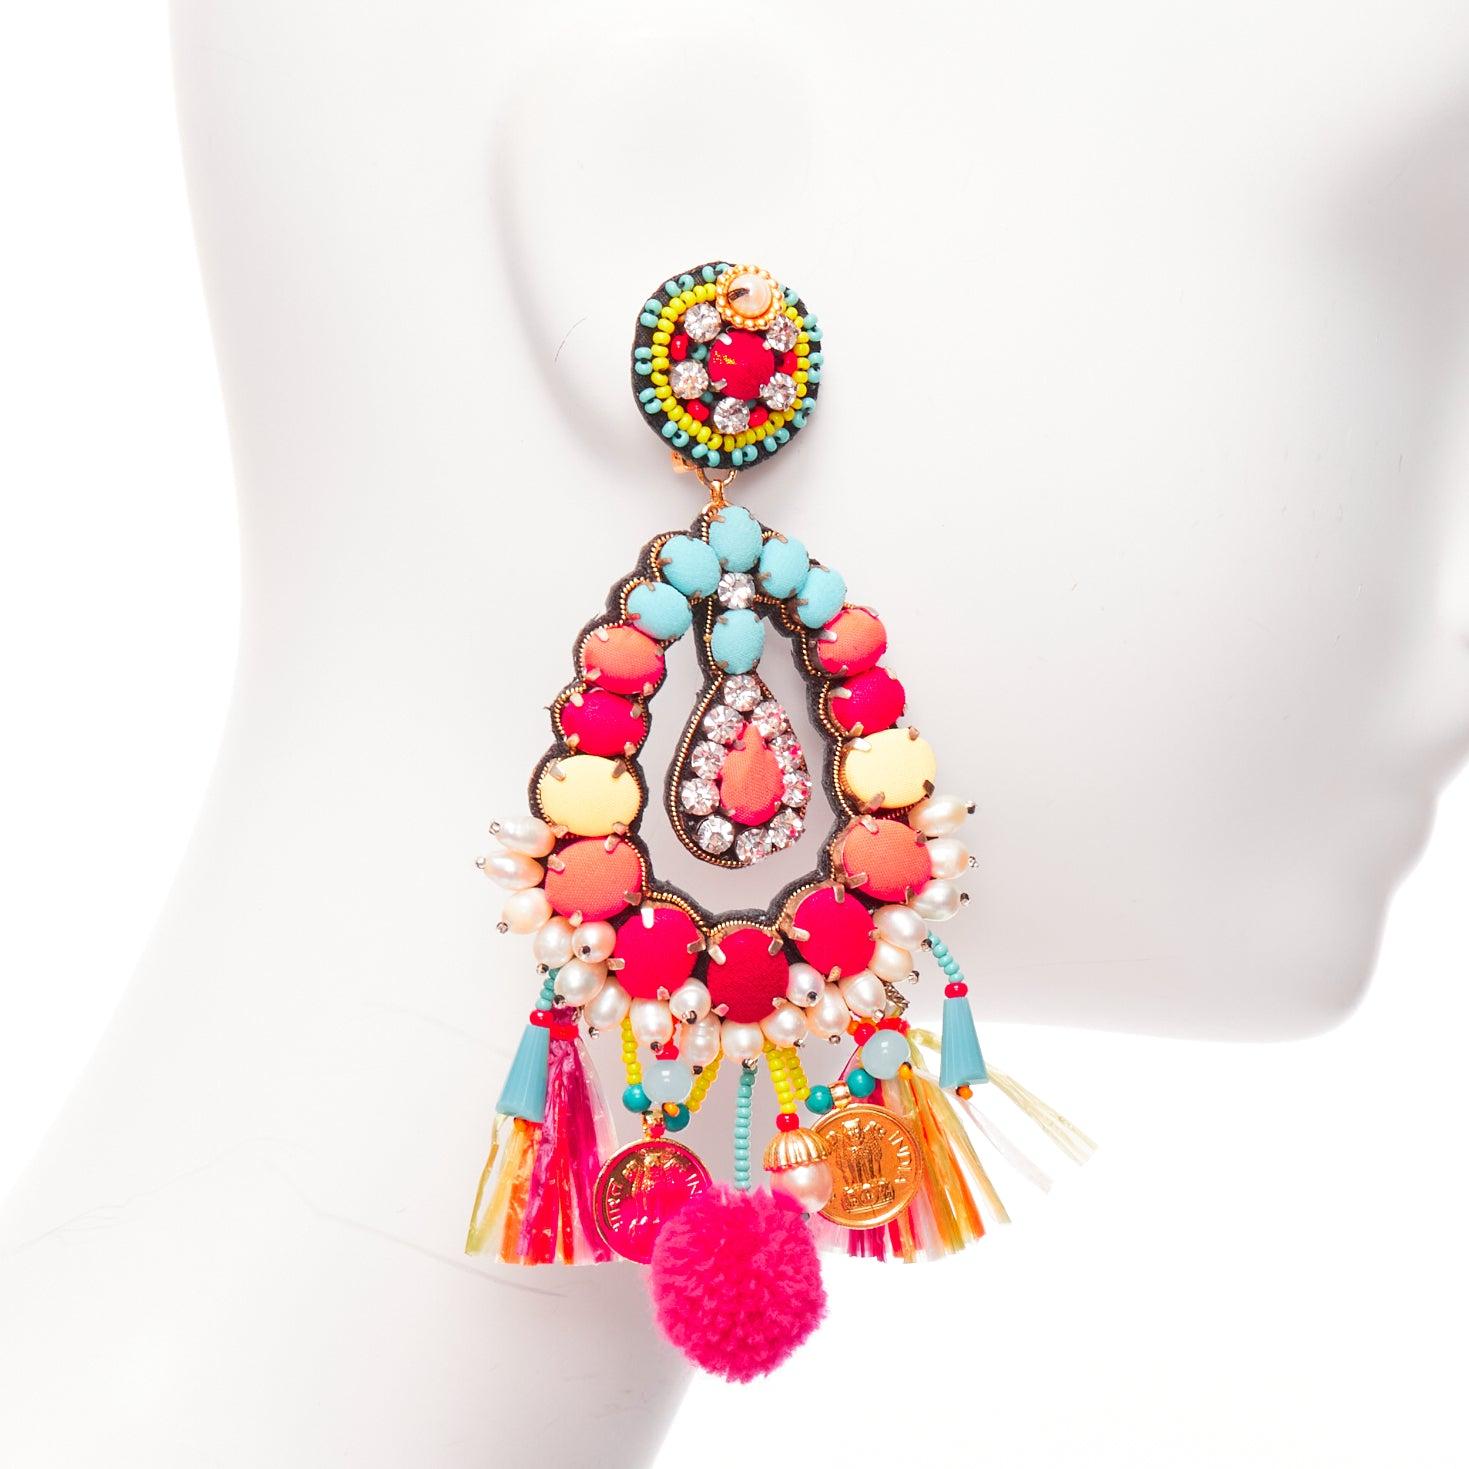 RANJANA KHAN neon orange crystal beads multi dangling clip on earrings
Reference: AAWC/A01216
Brand: Ranjana Khan
Material: Fabric
Color: Neon Pink, Multicolour
Pattern: Solid
Closure: Clip On
Lining: Black Leather
Extra Details: Black leather back.